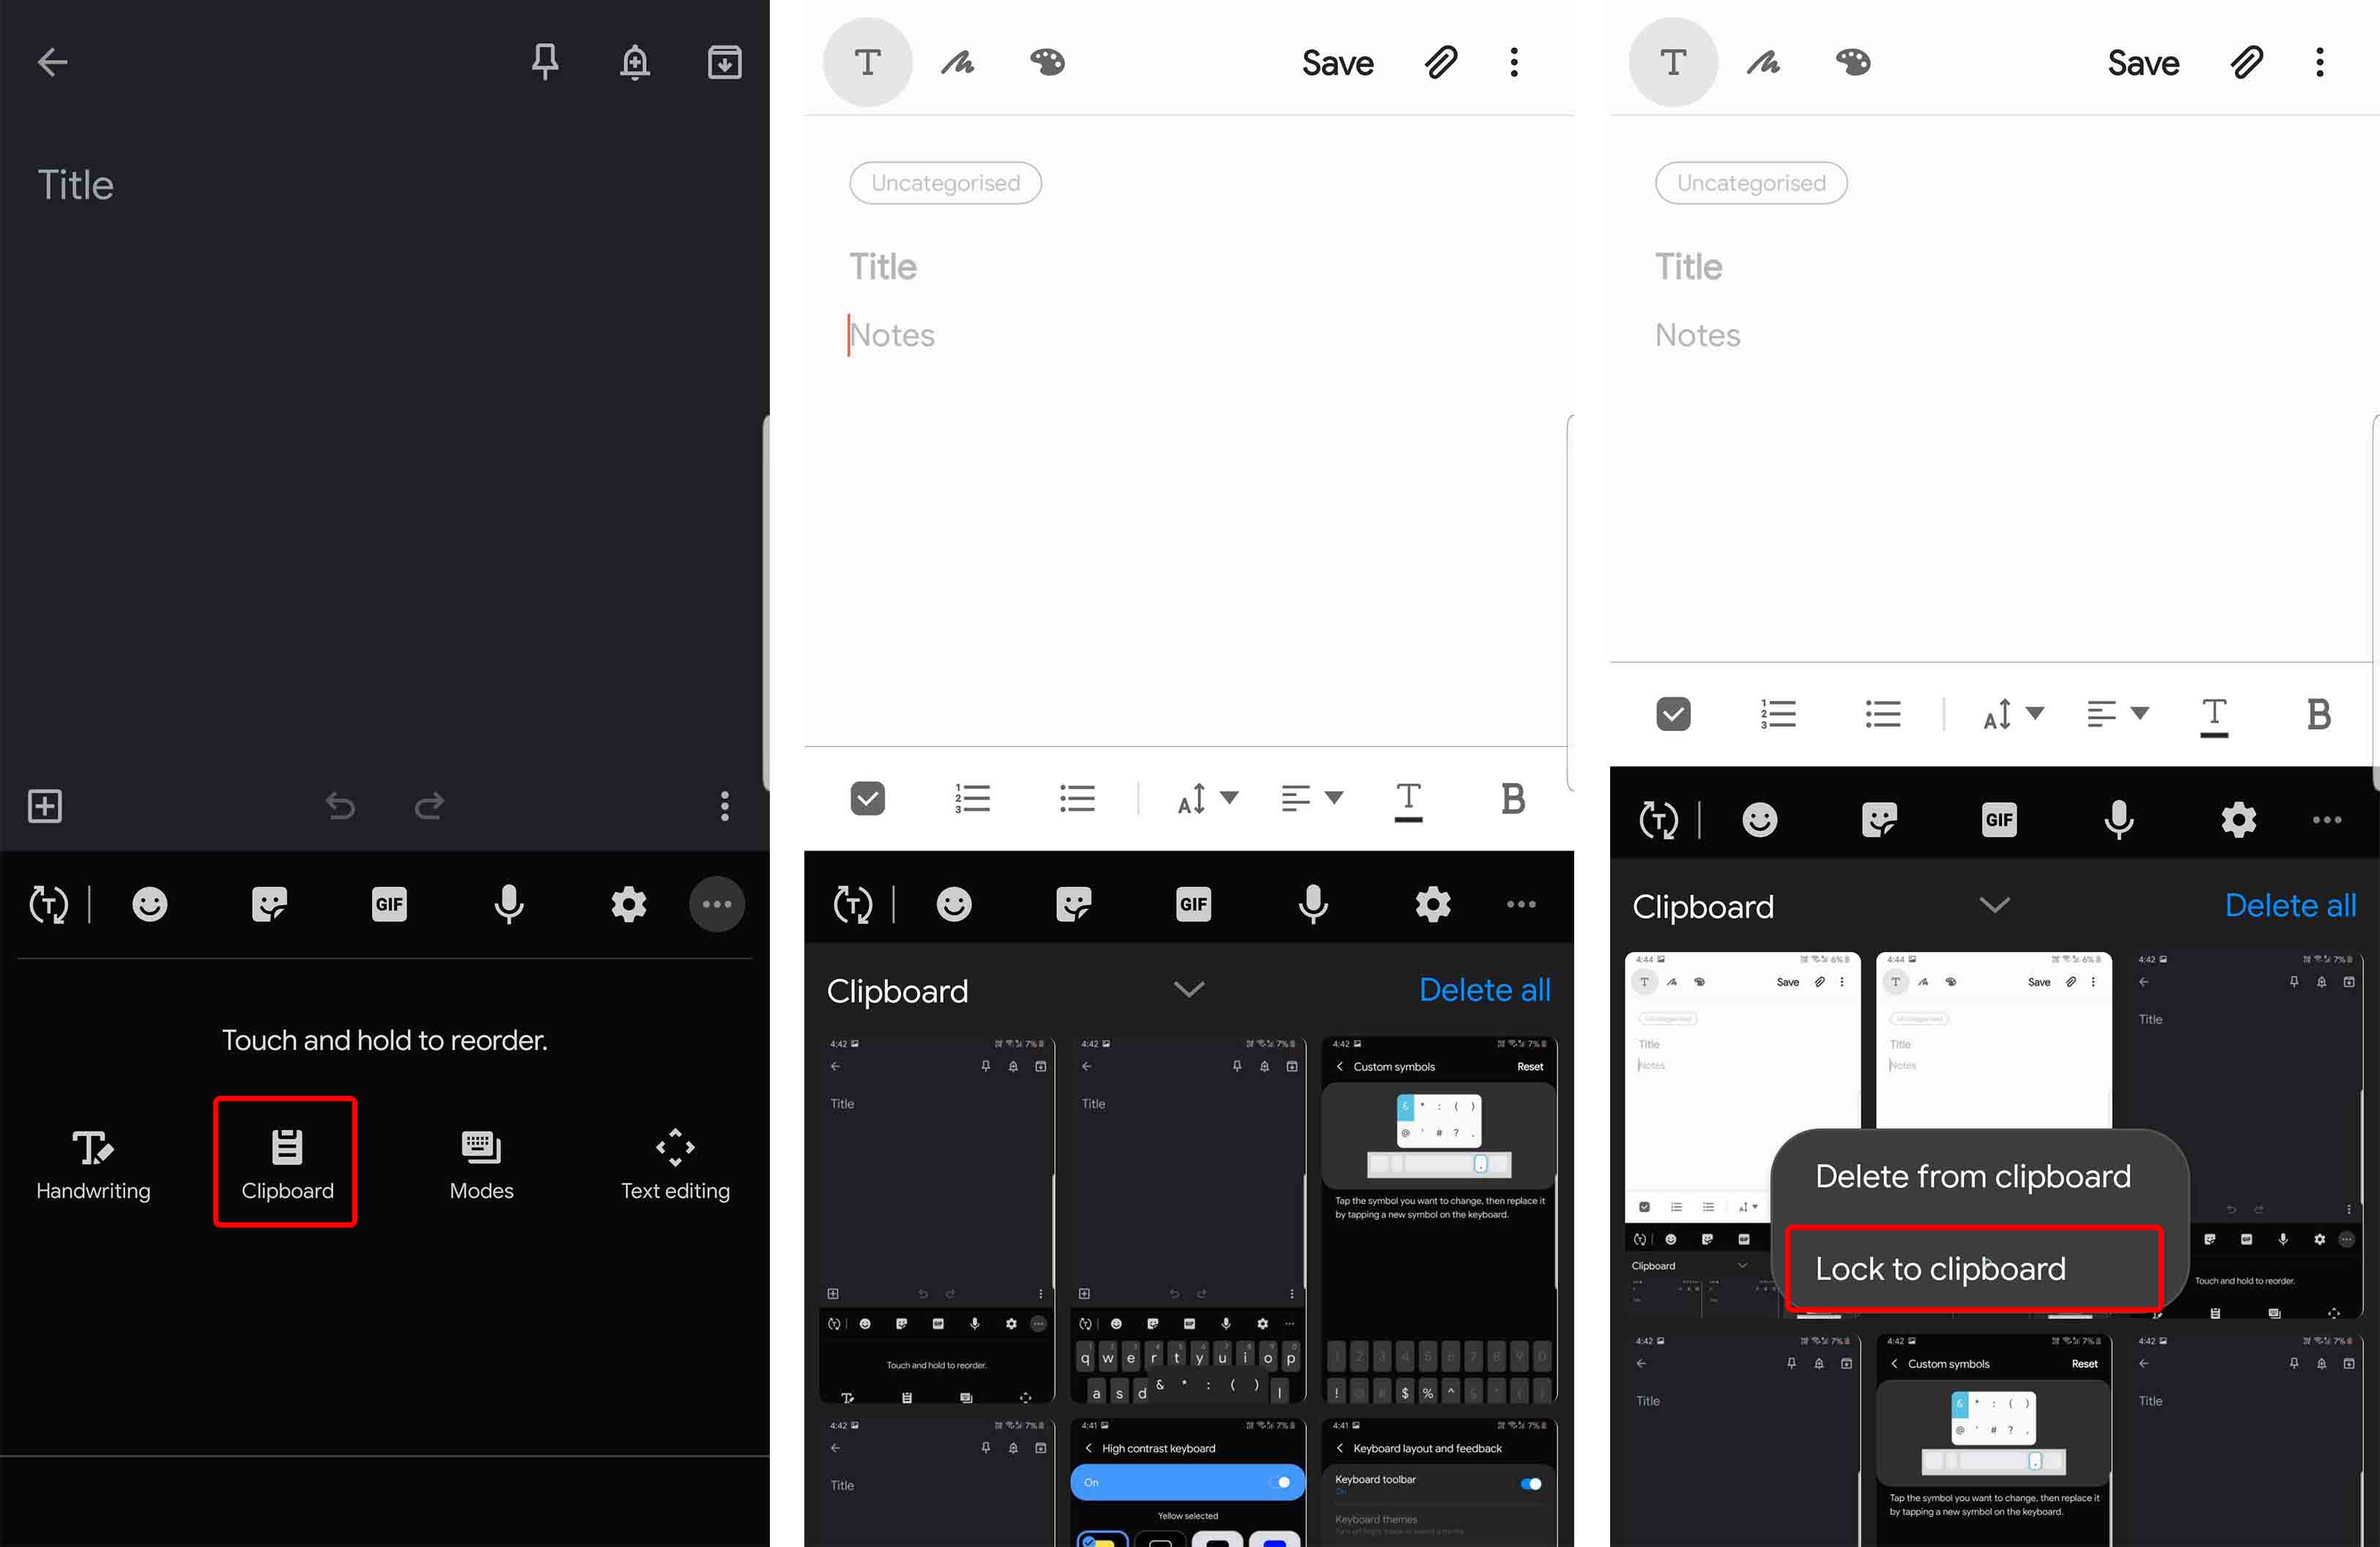 Copy Images in Samsung Keyboard